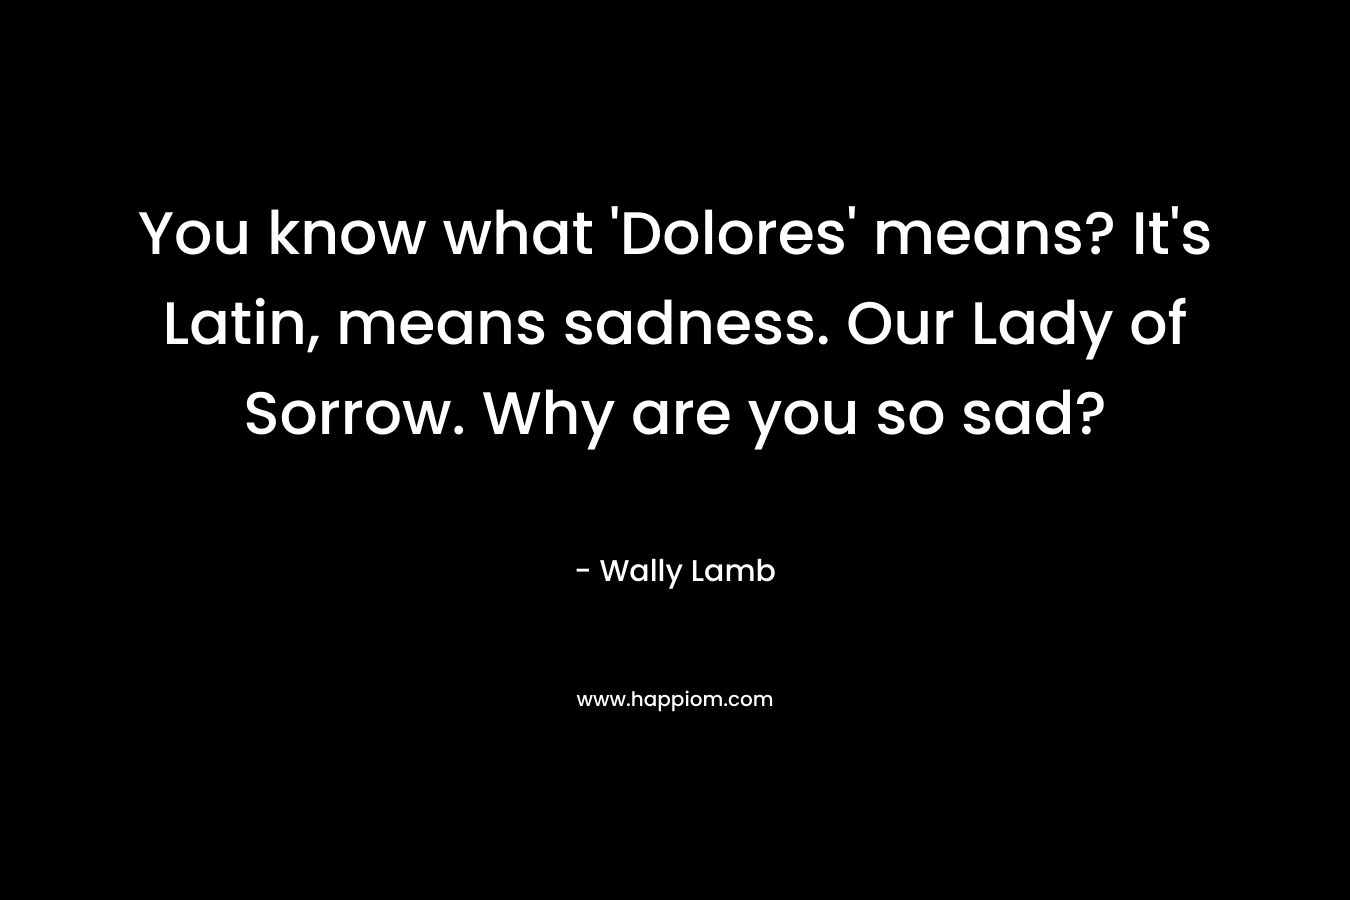 You know what ‘Dolores’ means? It’s Latin, means sadness. Our Lady of Sorrow. Why are you so sad? – Wally Lamb